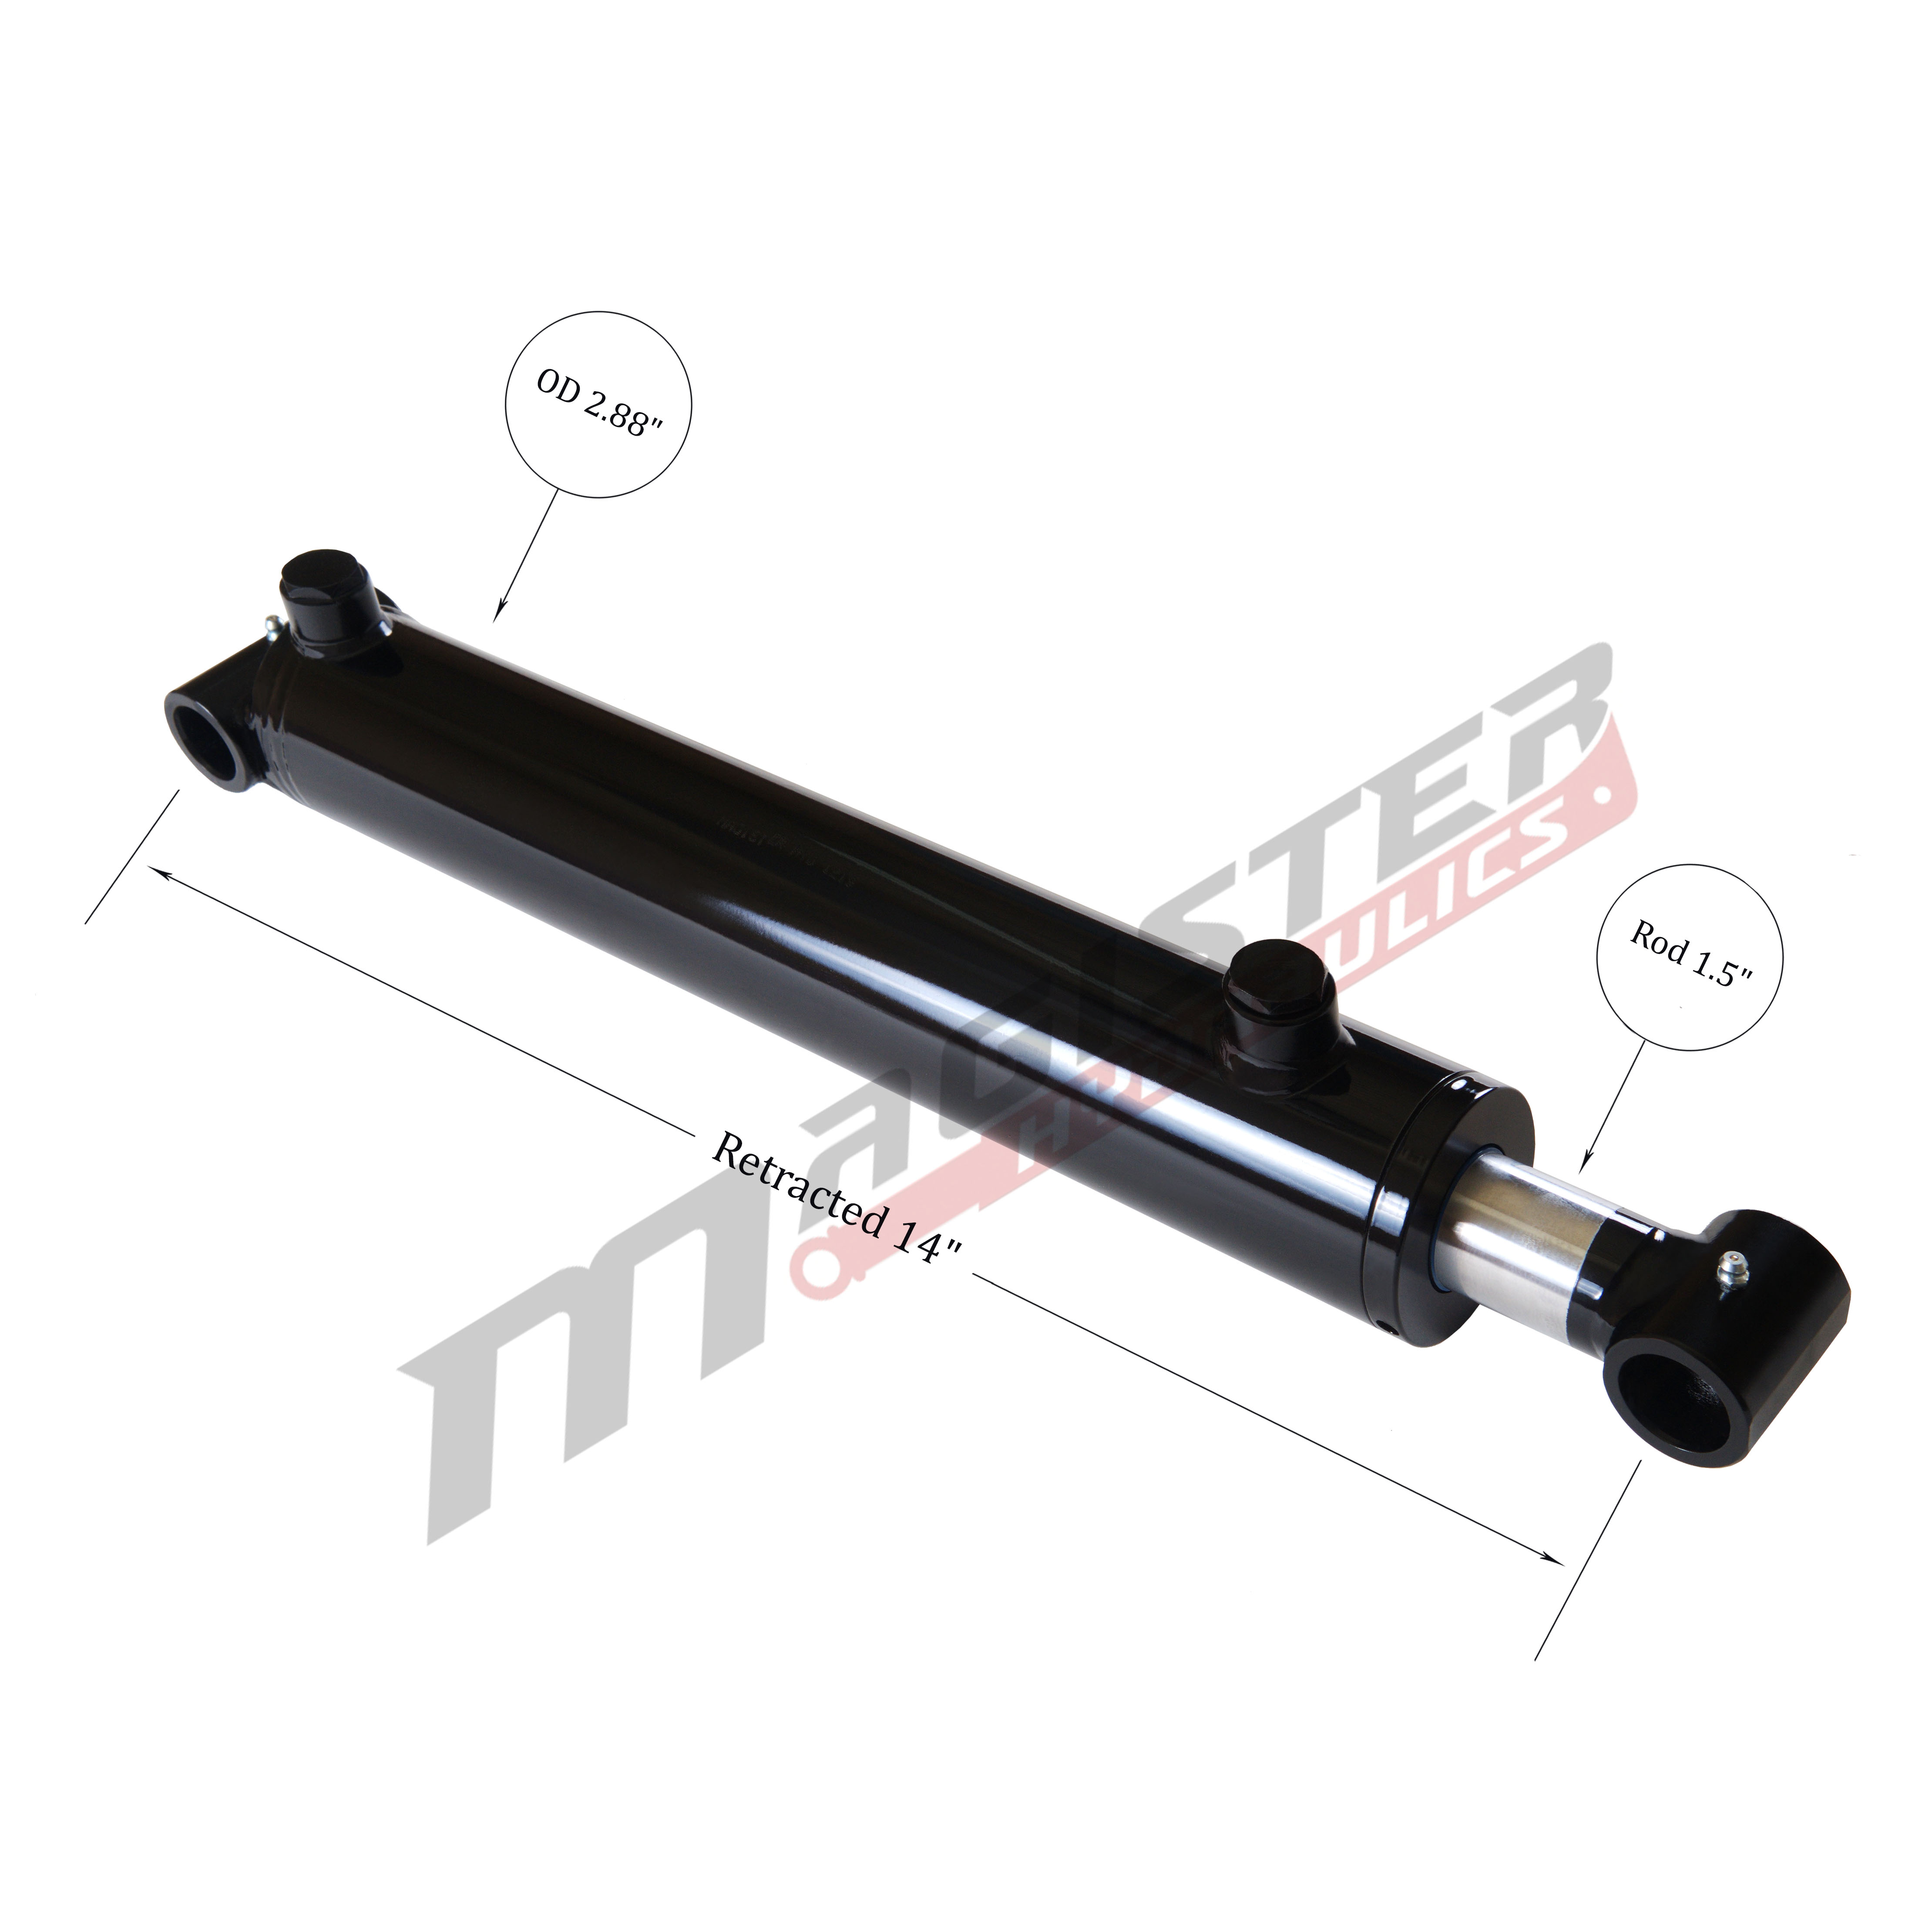 2.5 bore x 6 stroke hydraulic cylinder, welded cross tube double acting cylinder | Magister Hydraulics